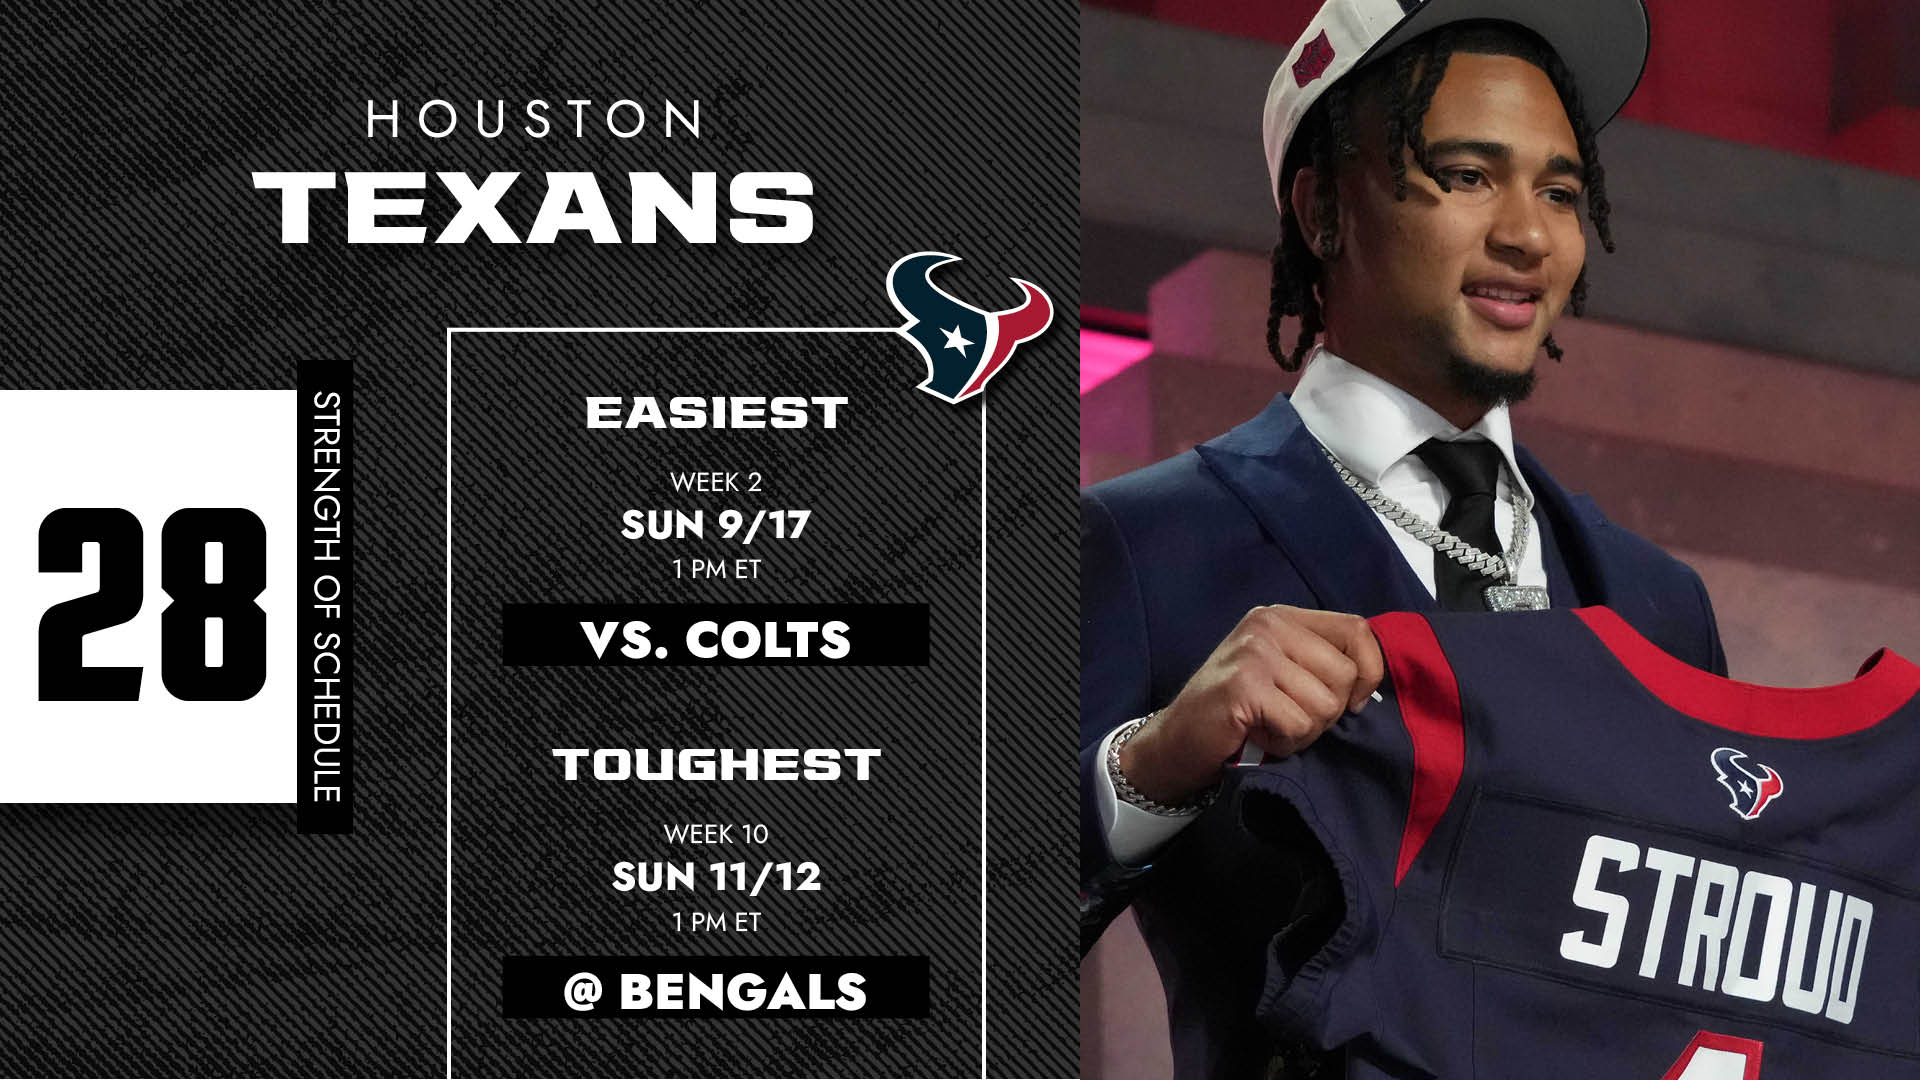 texans game home or away